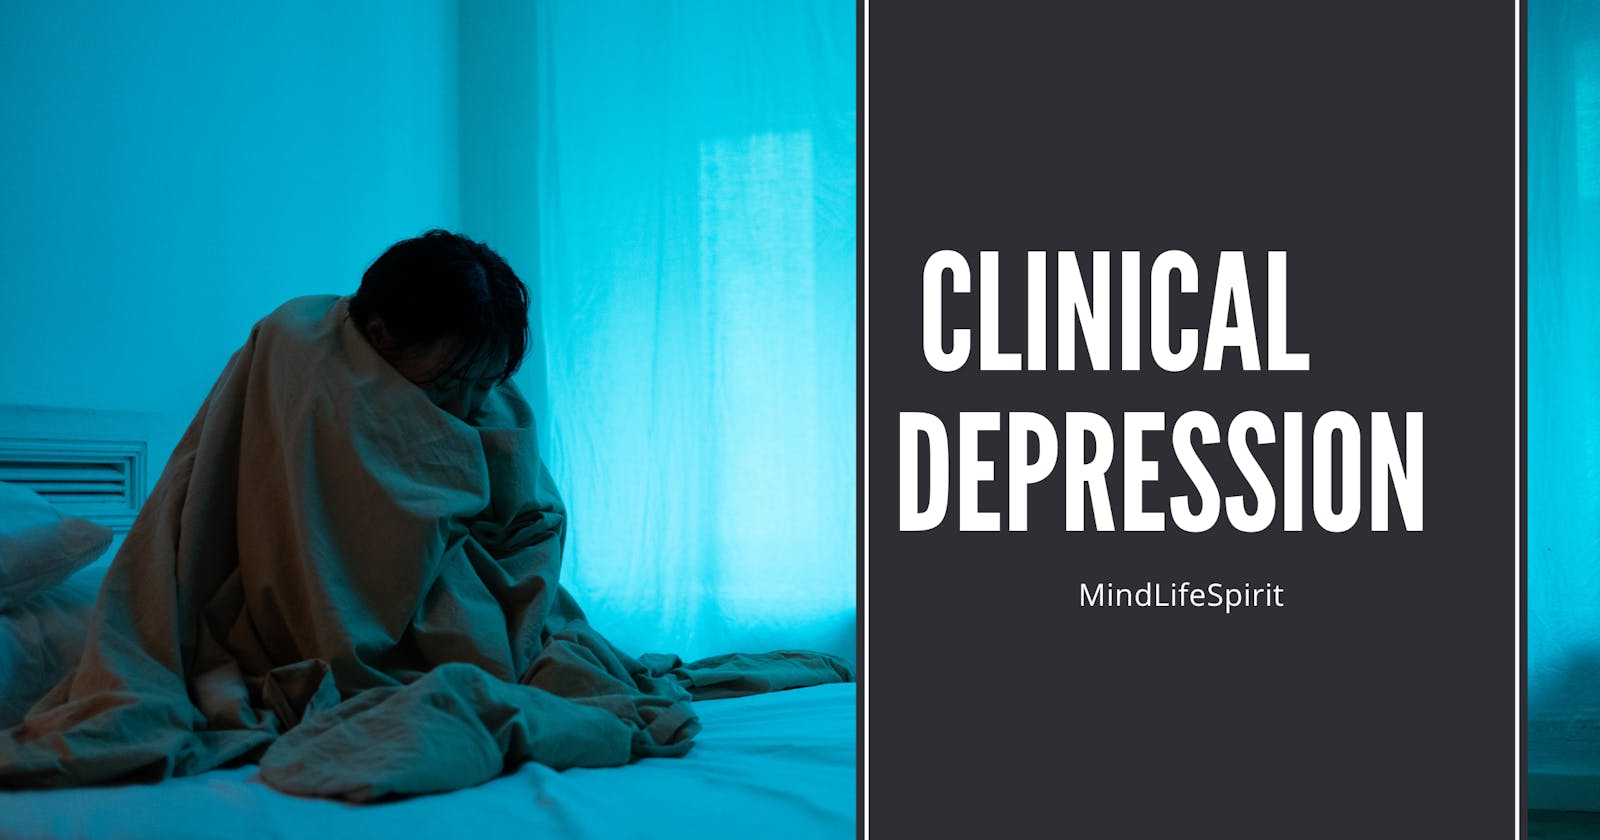 What are the Symptoms Of Clinical Depression and how to treat them?